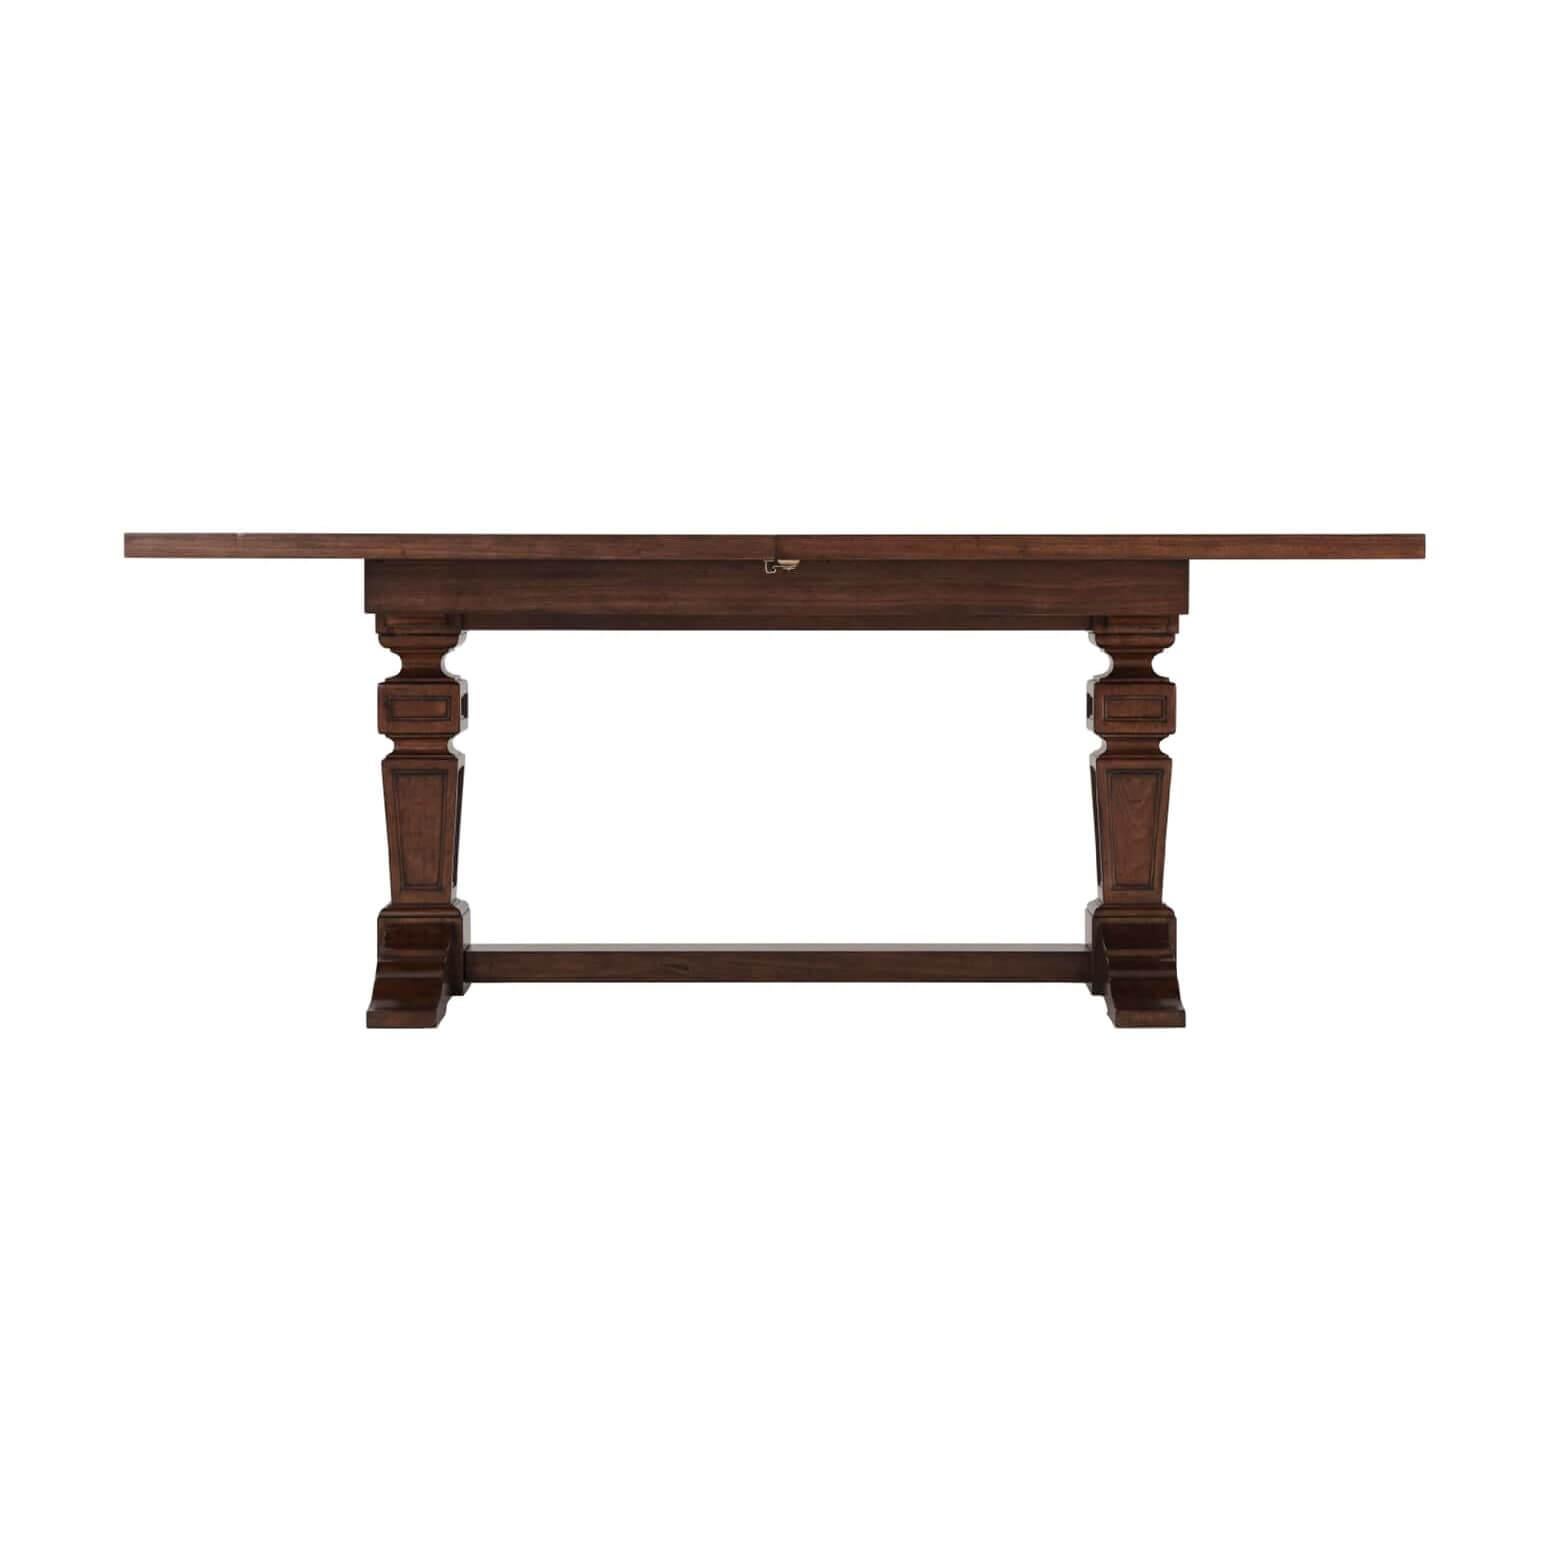 French Provincial Provincial Neoclassic Extension Dining Table